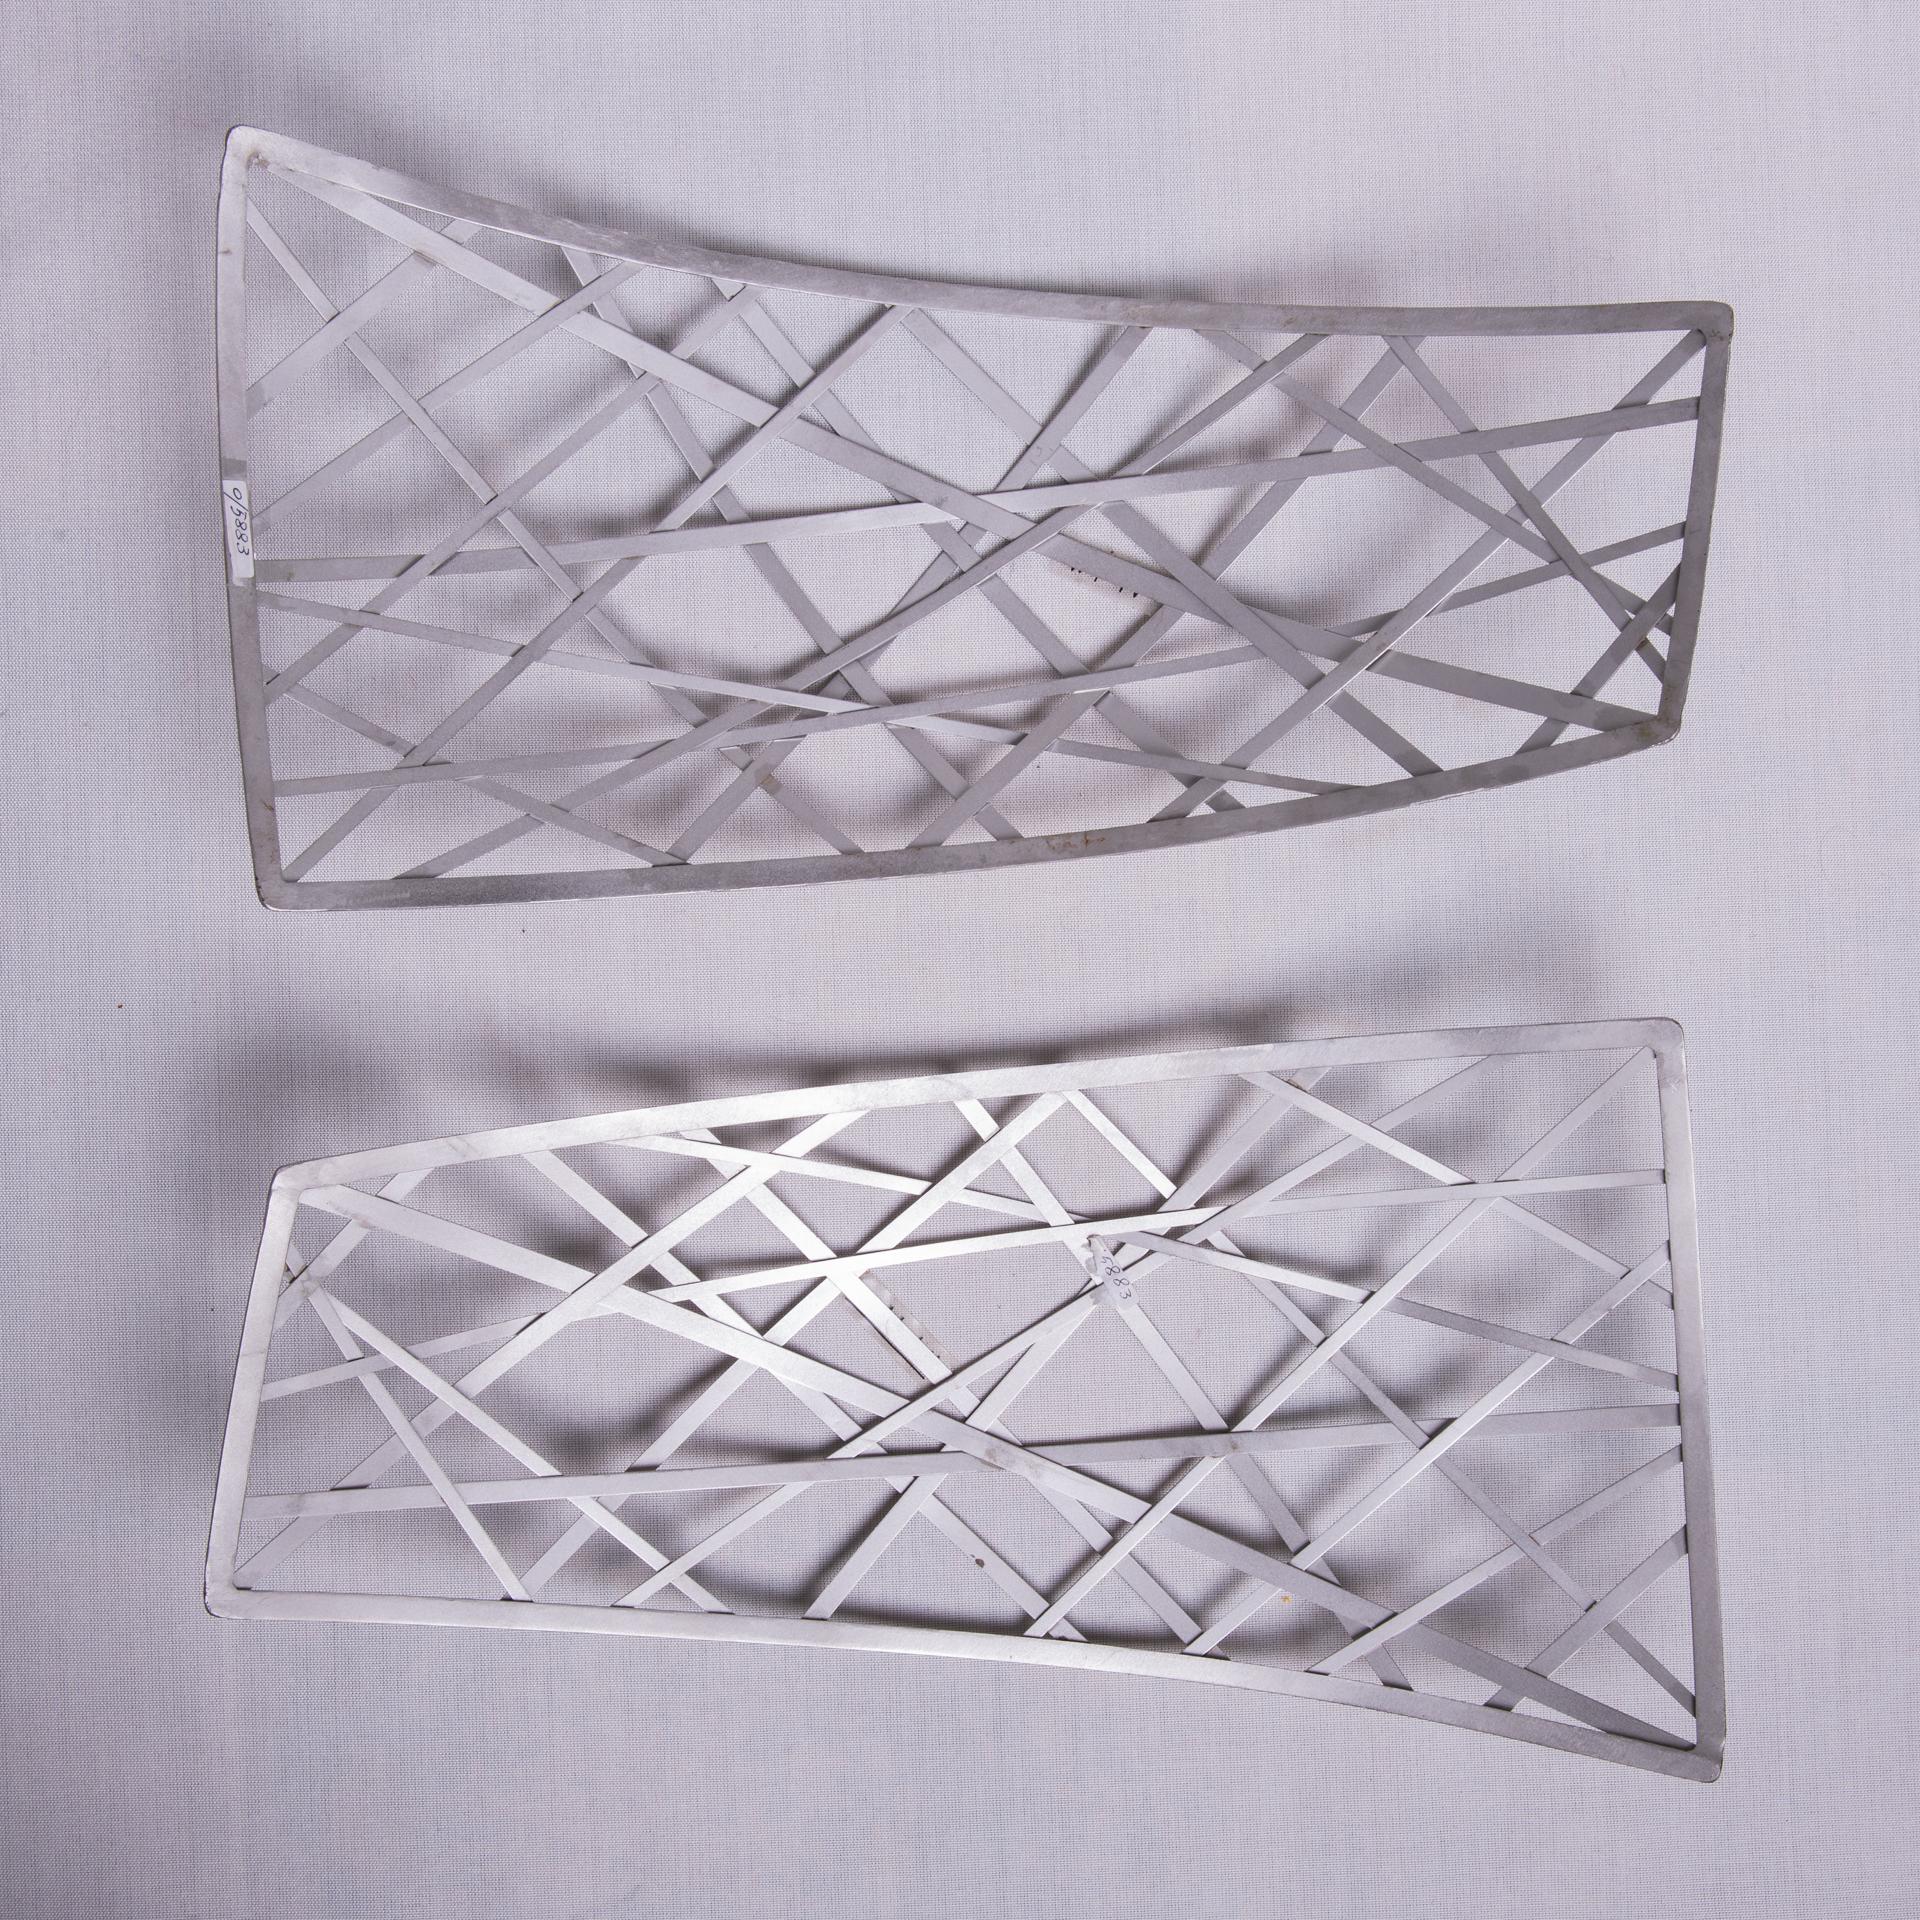 Other Pair of Trays Criss Cross by M.Aram  For Sale